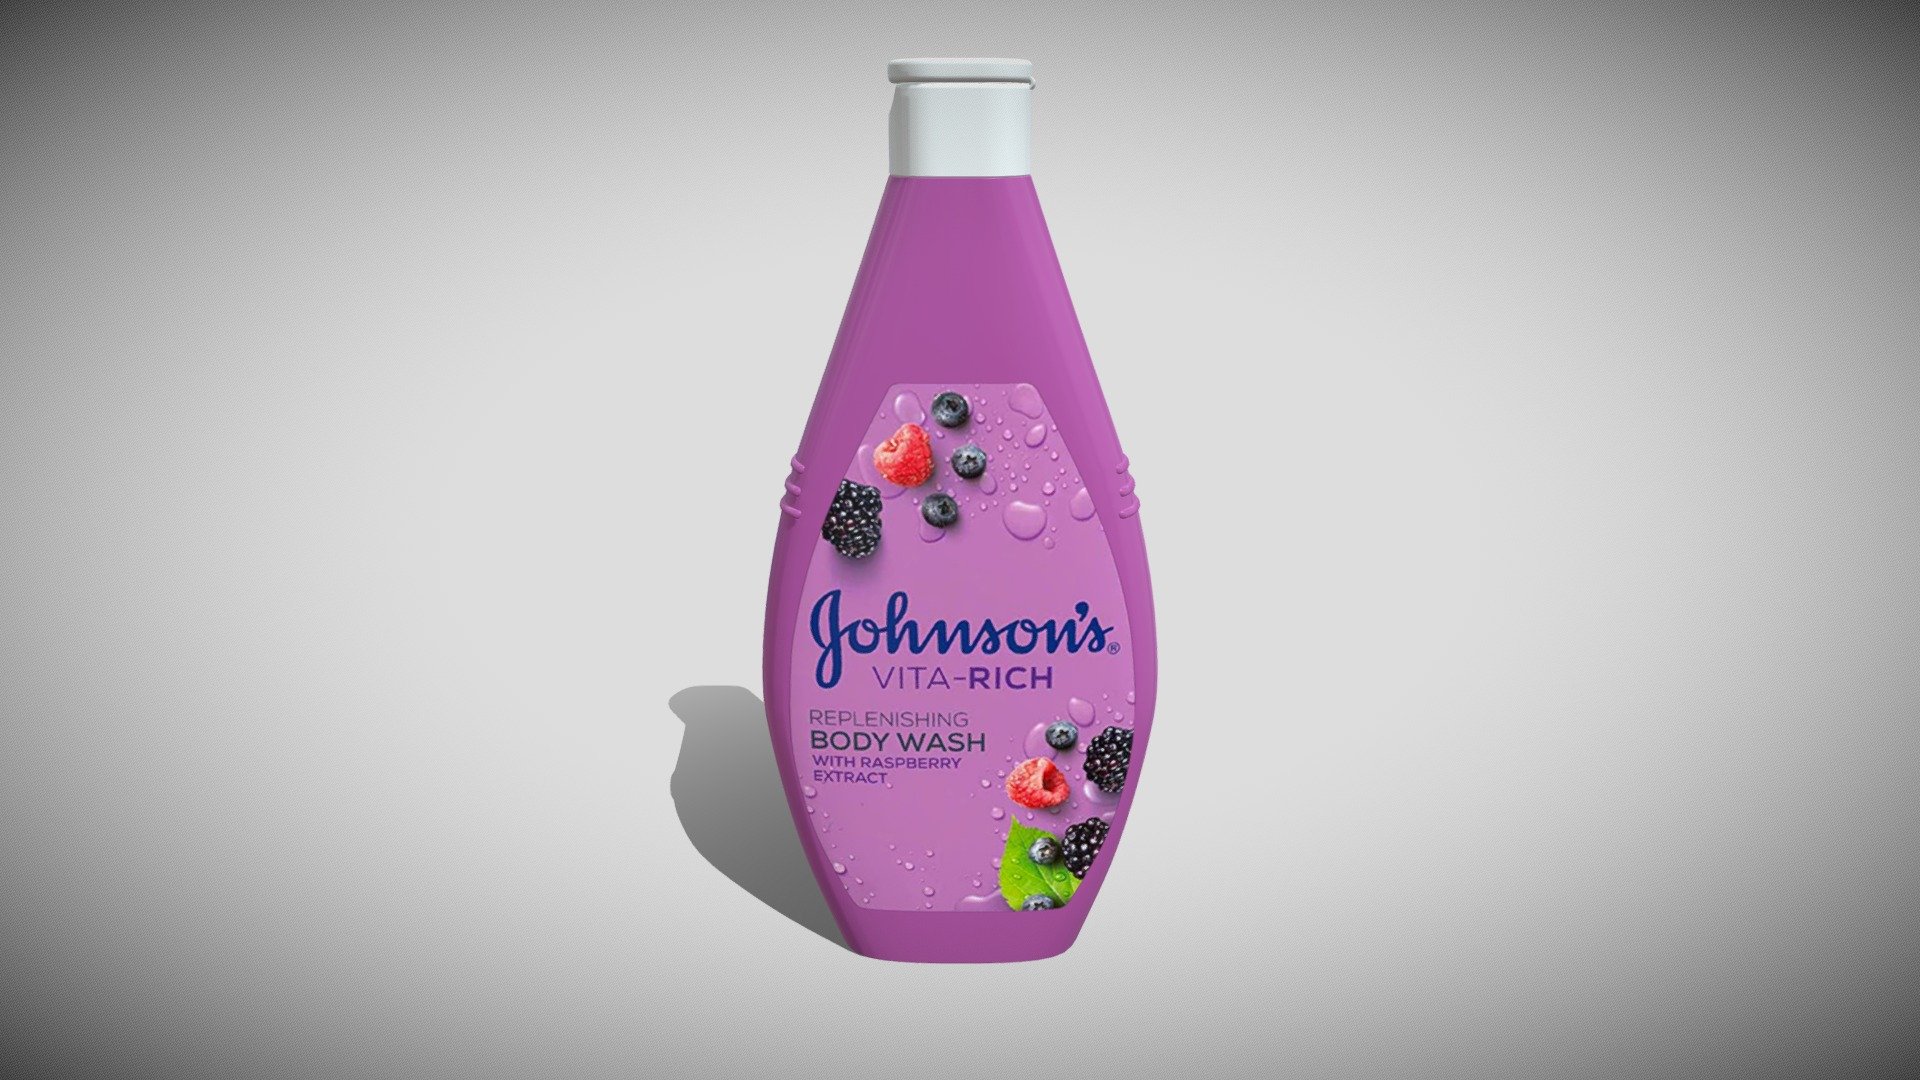 Detailed model of a Johnsons Vita- Rich Raspberry Extract Body Wash, modeled in Cinema 4D.The model was created using approximate real world dimensions.

The model has 5,818 polys and 5,709 vertices.

An additional file has been provided containing the original Cinema 4D project file, textures and other 3d export files such as 3ds, fbx and obj 3d model